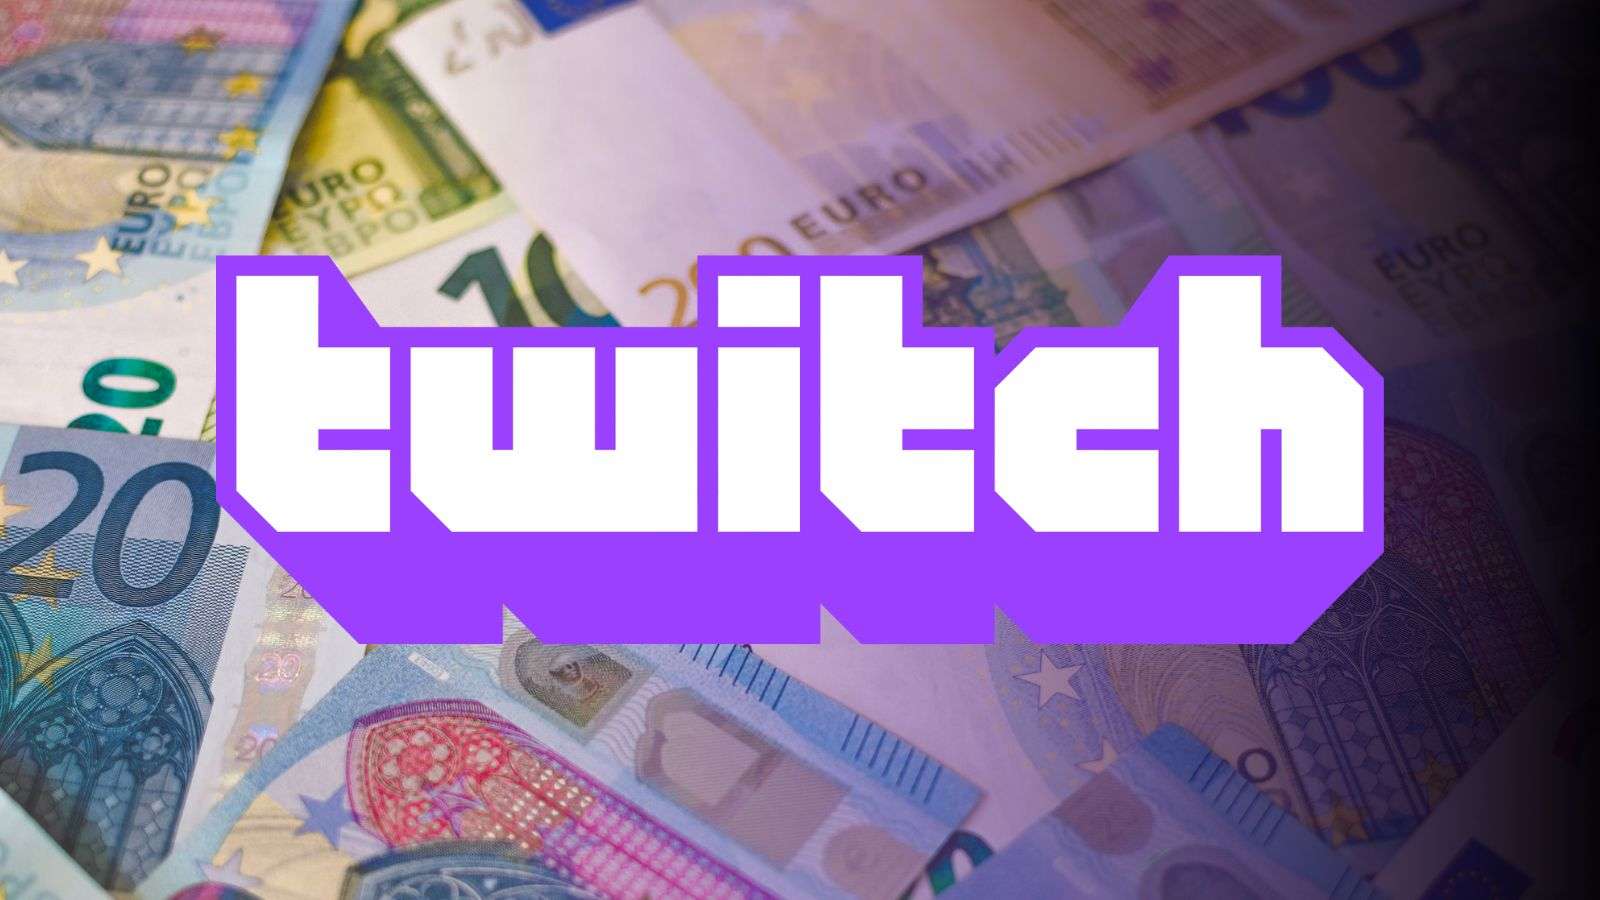 Twitch logo with euro currency notes behind